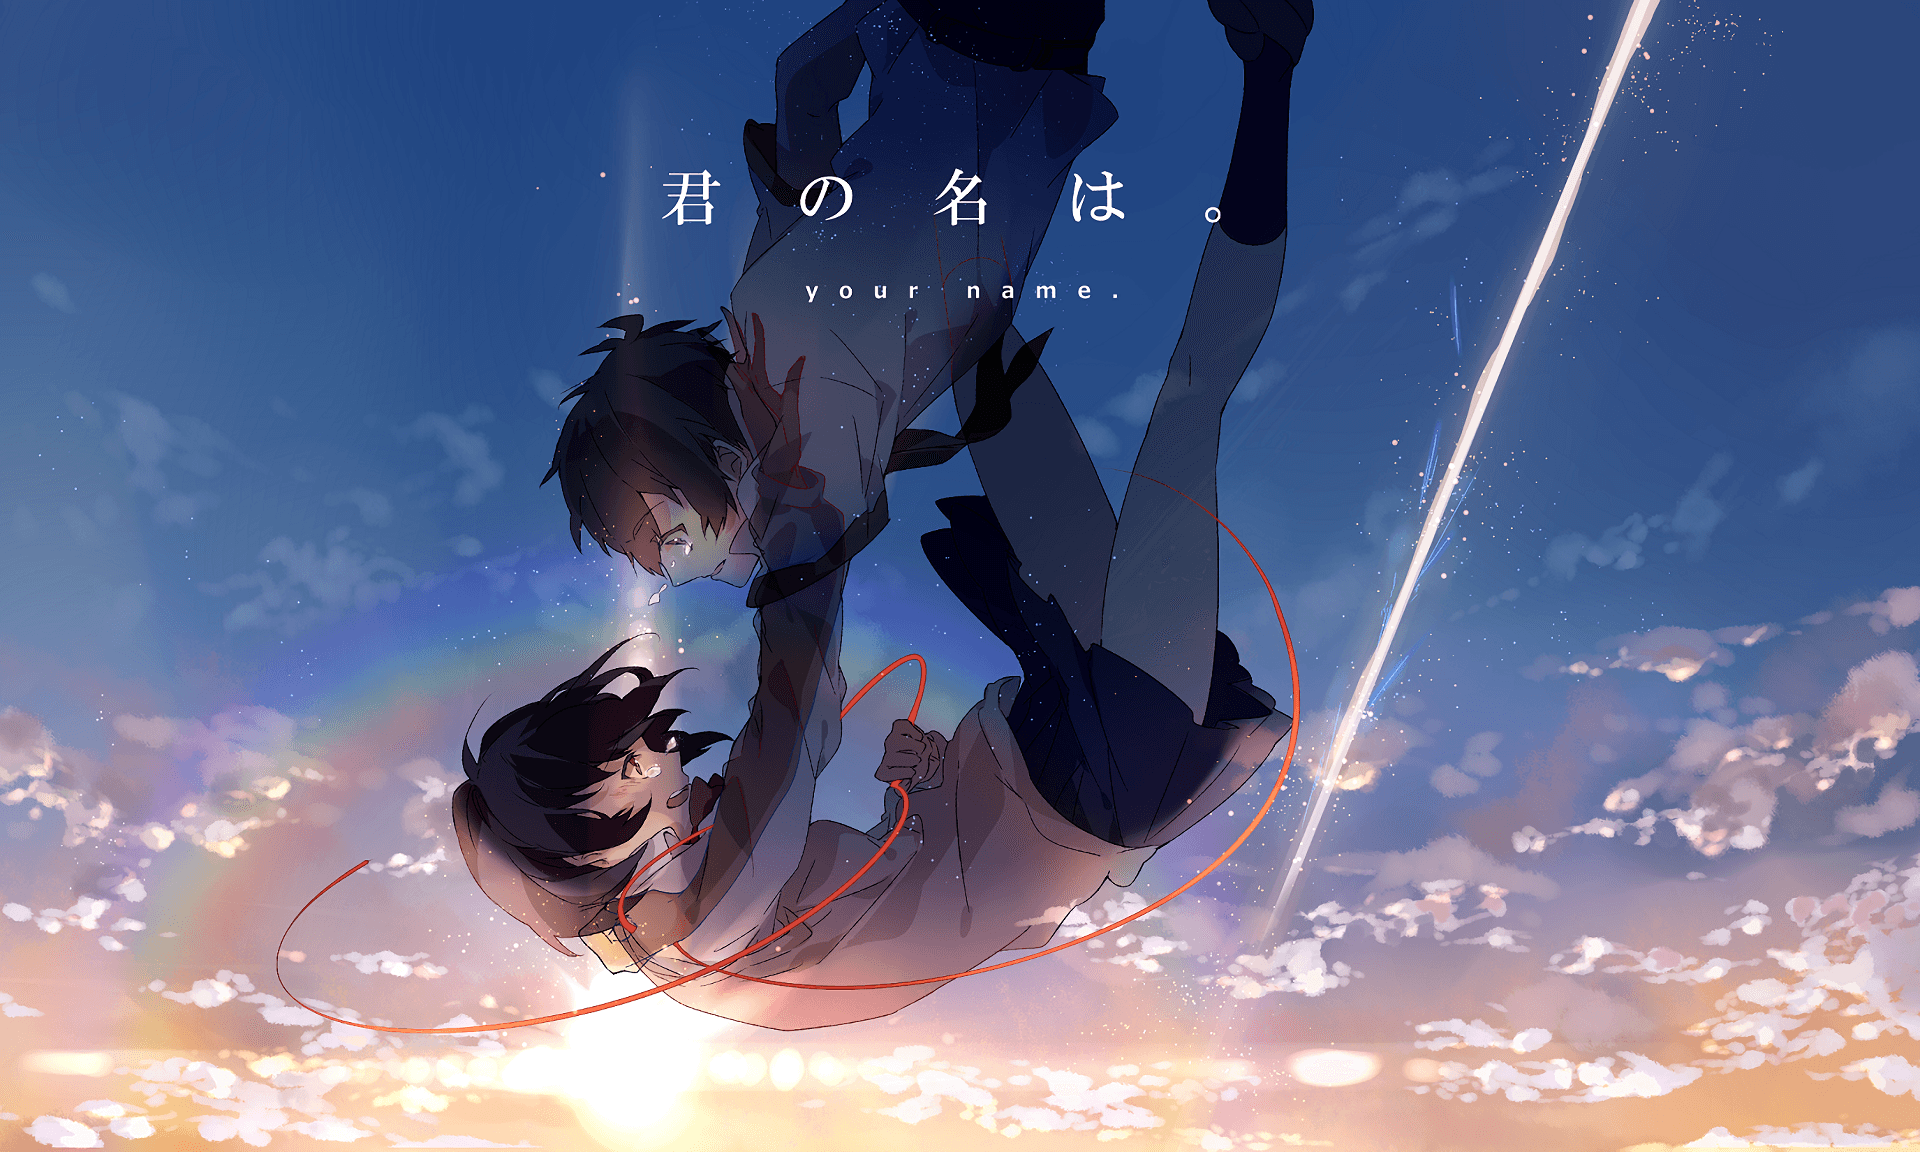 Two Star Crossed Lovers in Kimi No Na Wa